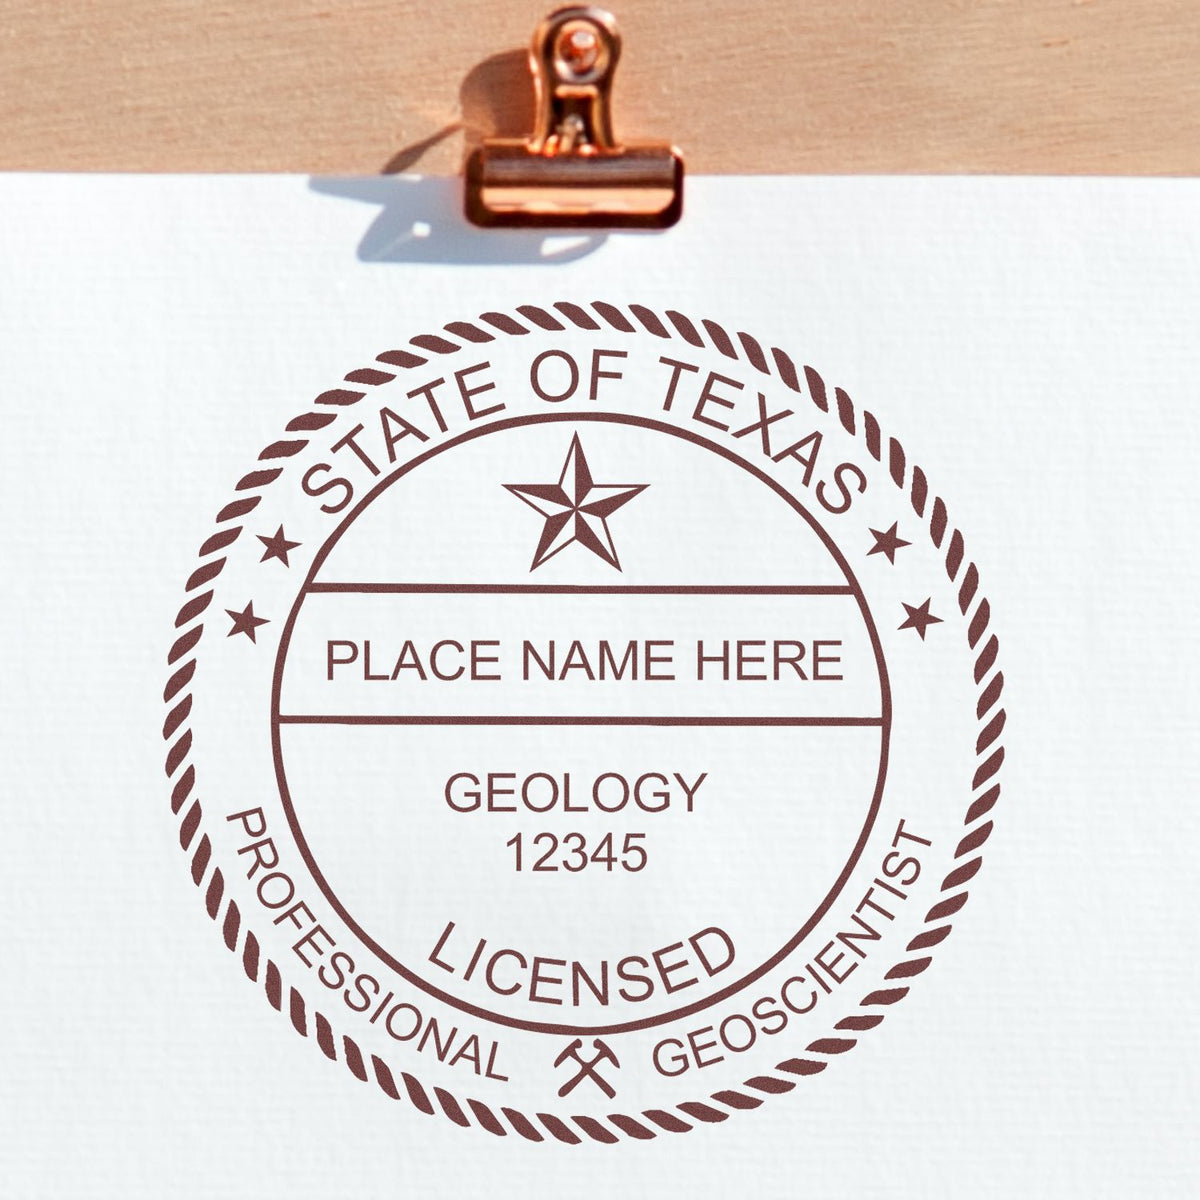 Another Example of a stamped impression of the Texas Professional Geologist Seal Stamp on a office form